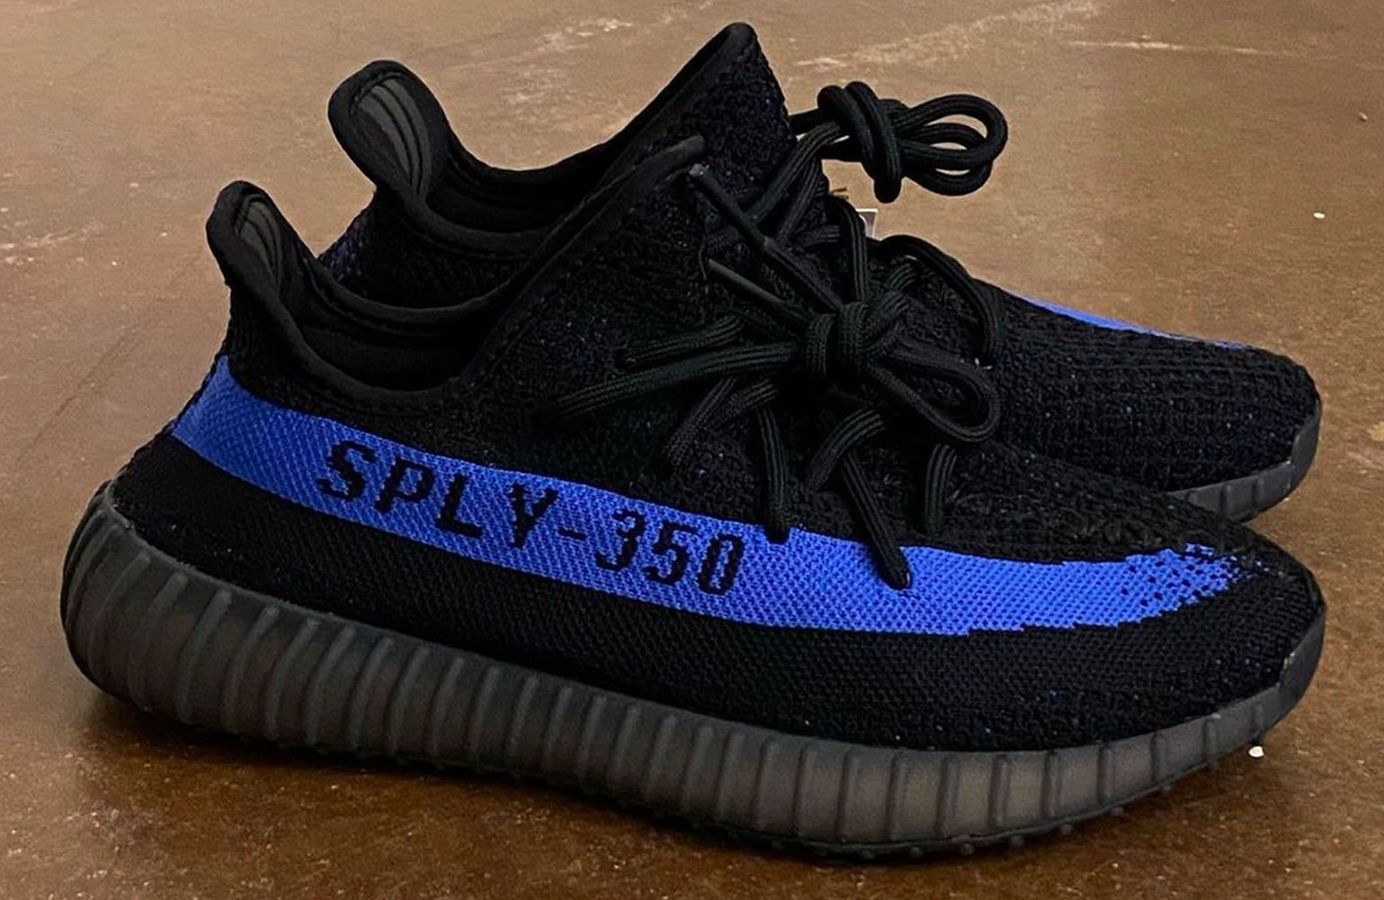 adidas Yeezy Boosadidas Yeezy Boost 350 v2 Dazzling Blue OUT NOW ...